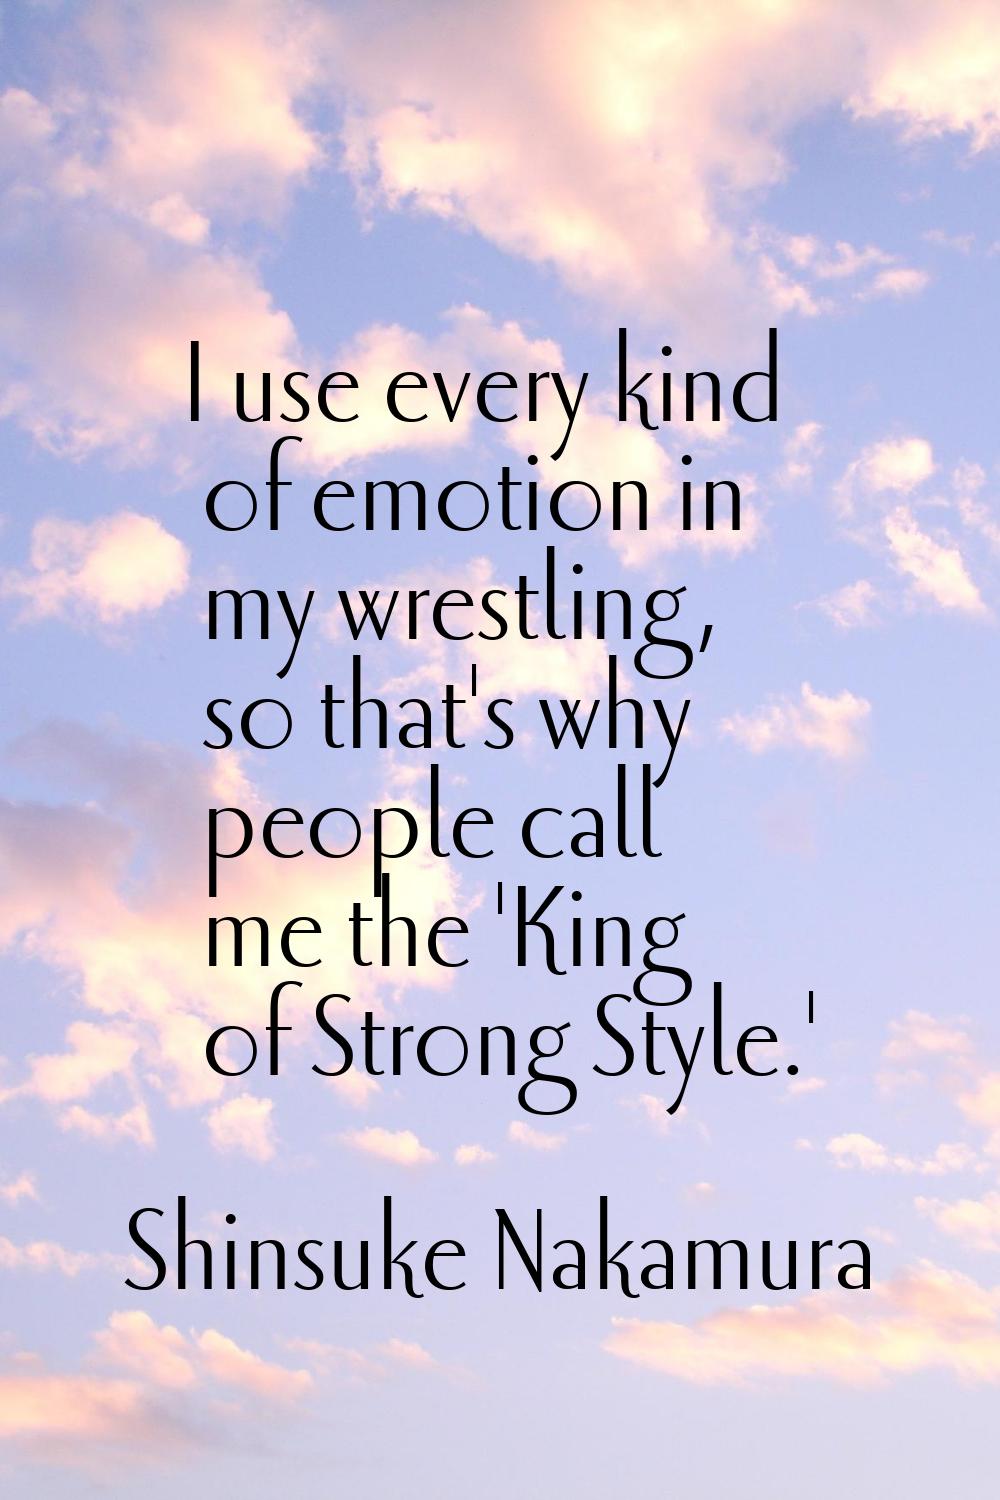 I use every kind of emotion in my wrestling, so that's why people call me the 'King of Strong Style